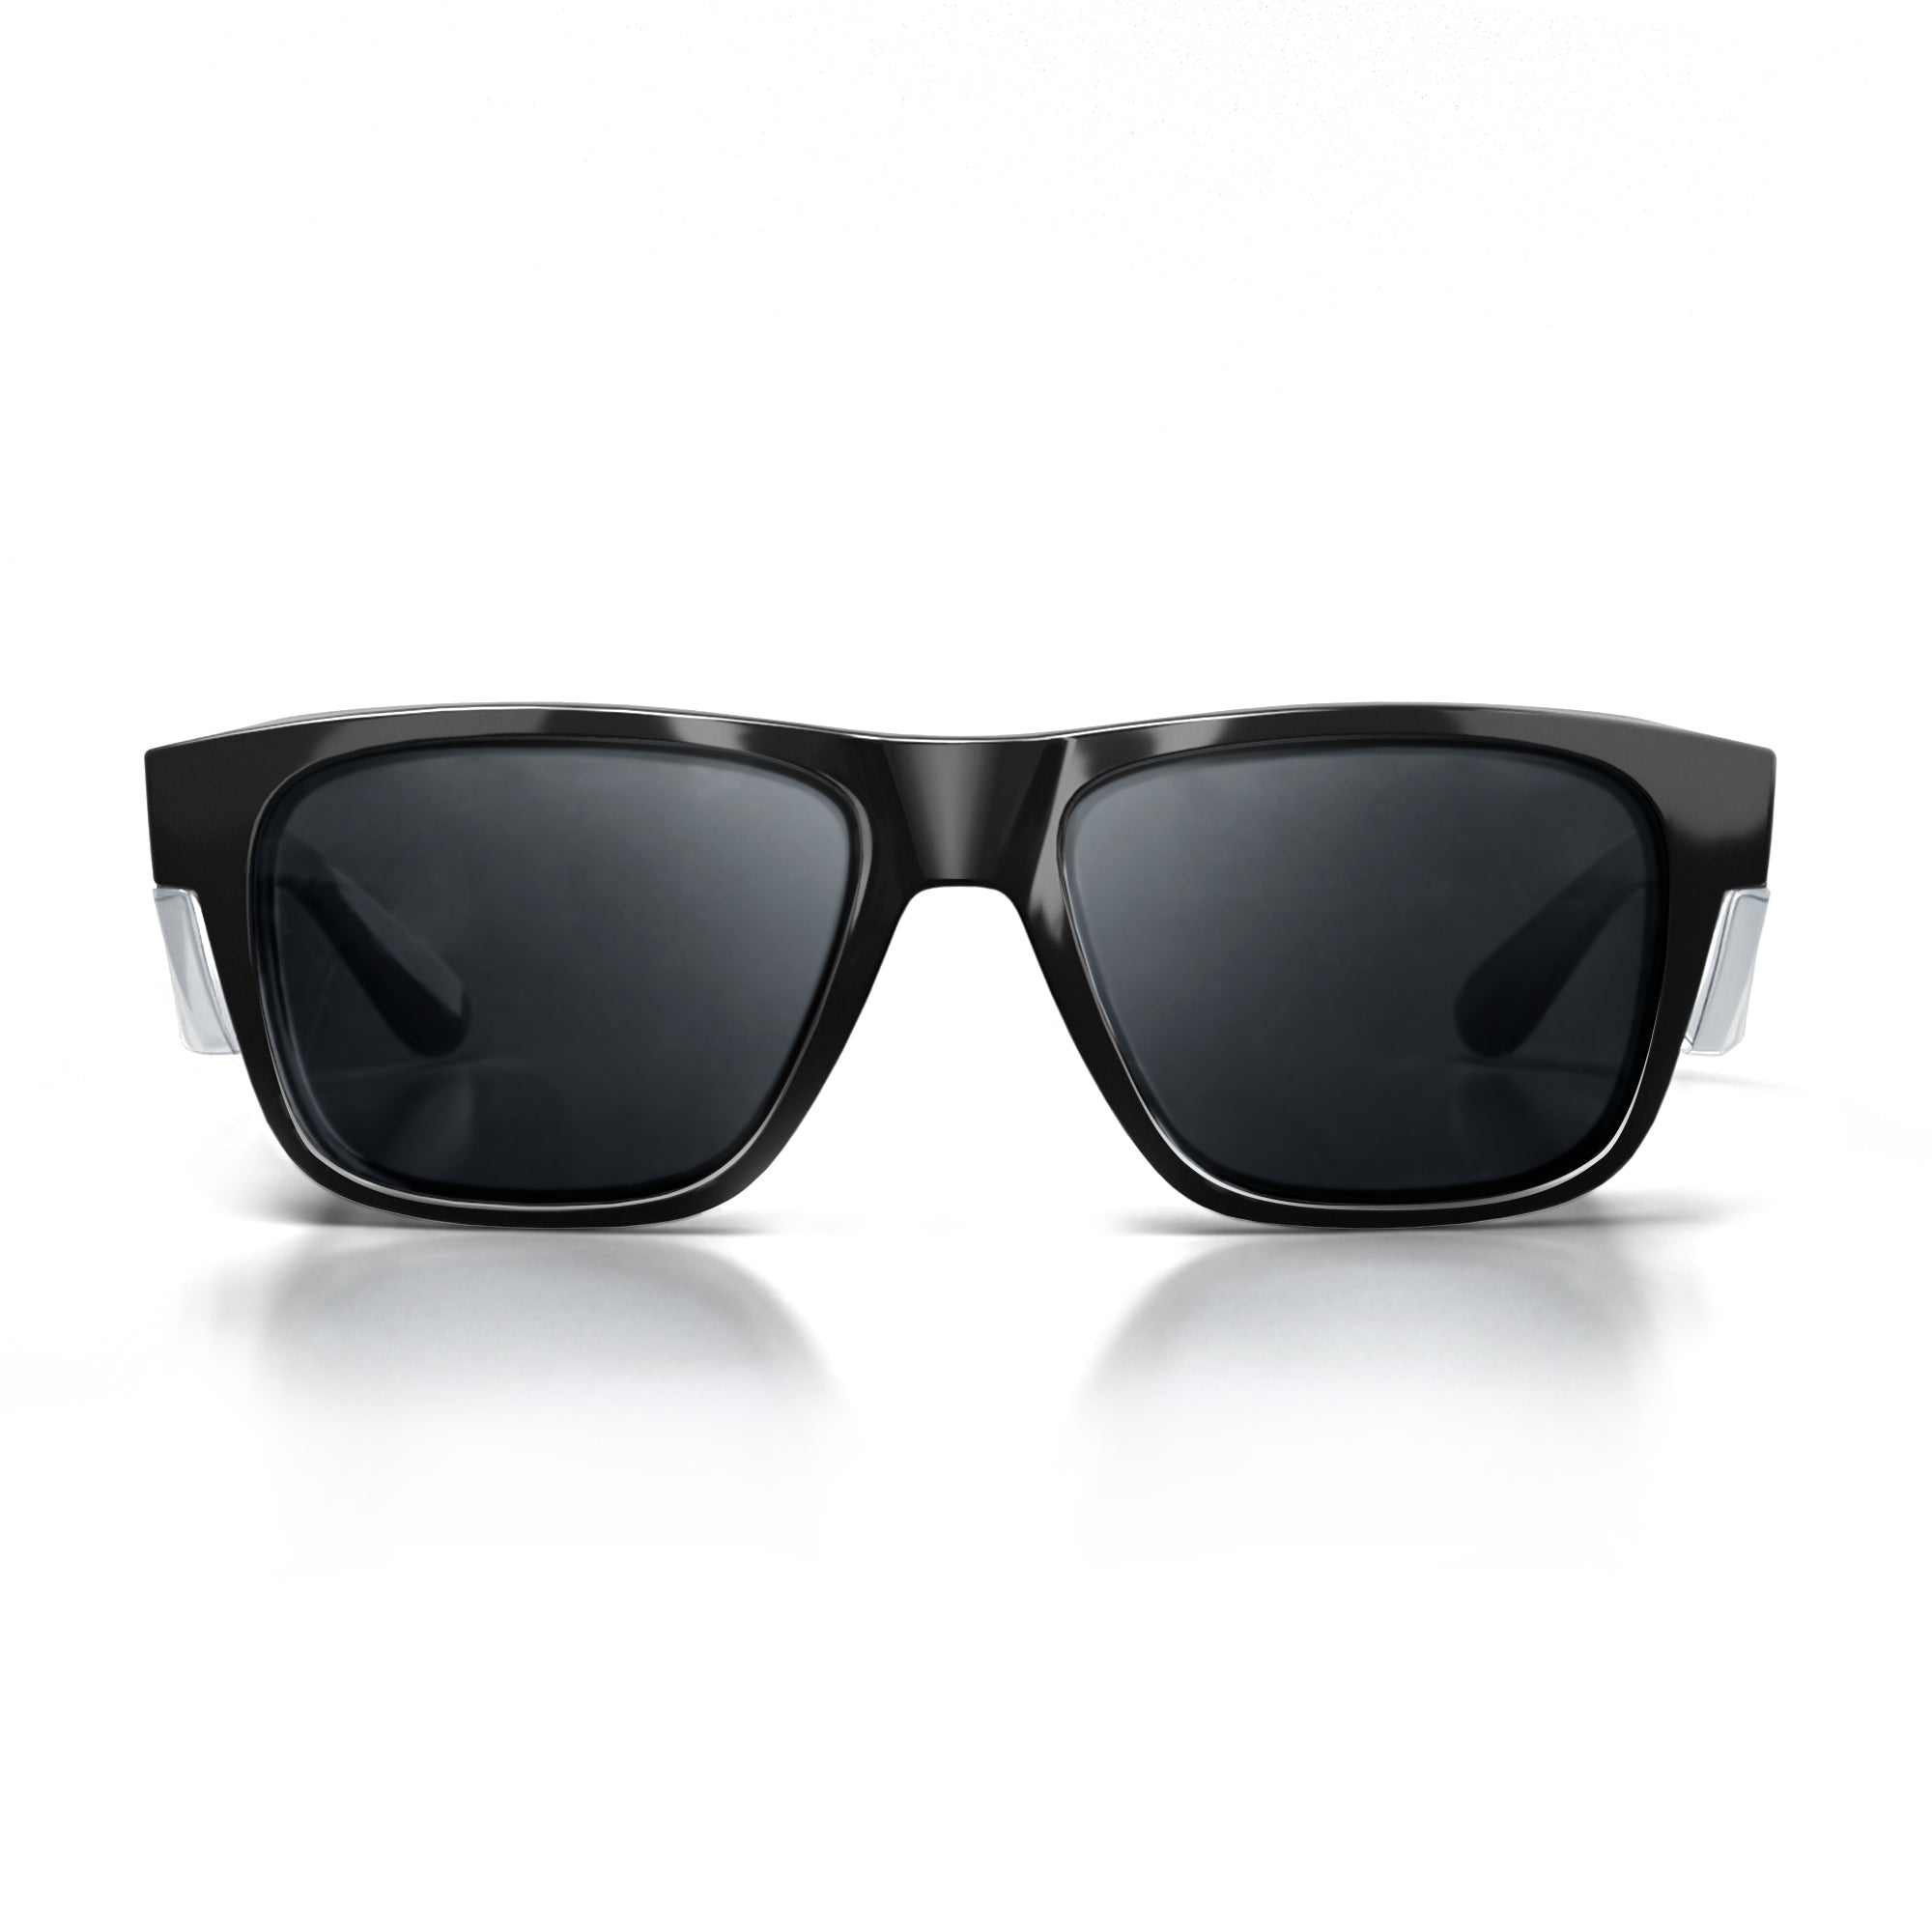 Safe Style Fusions Black Frame/Tinted - FBT100